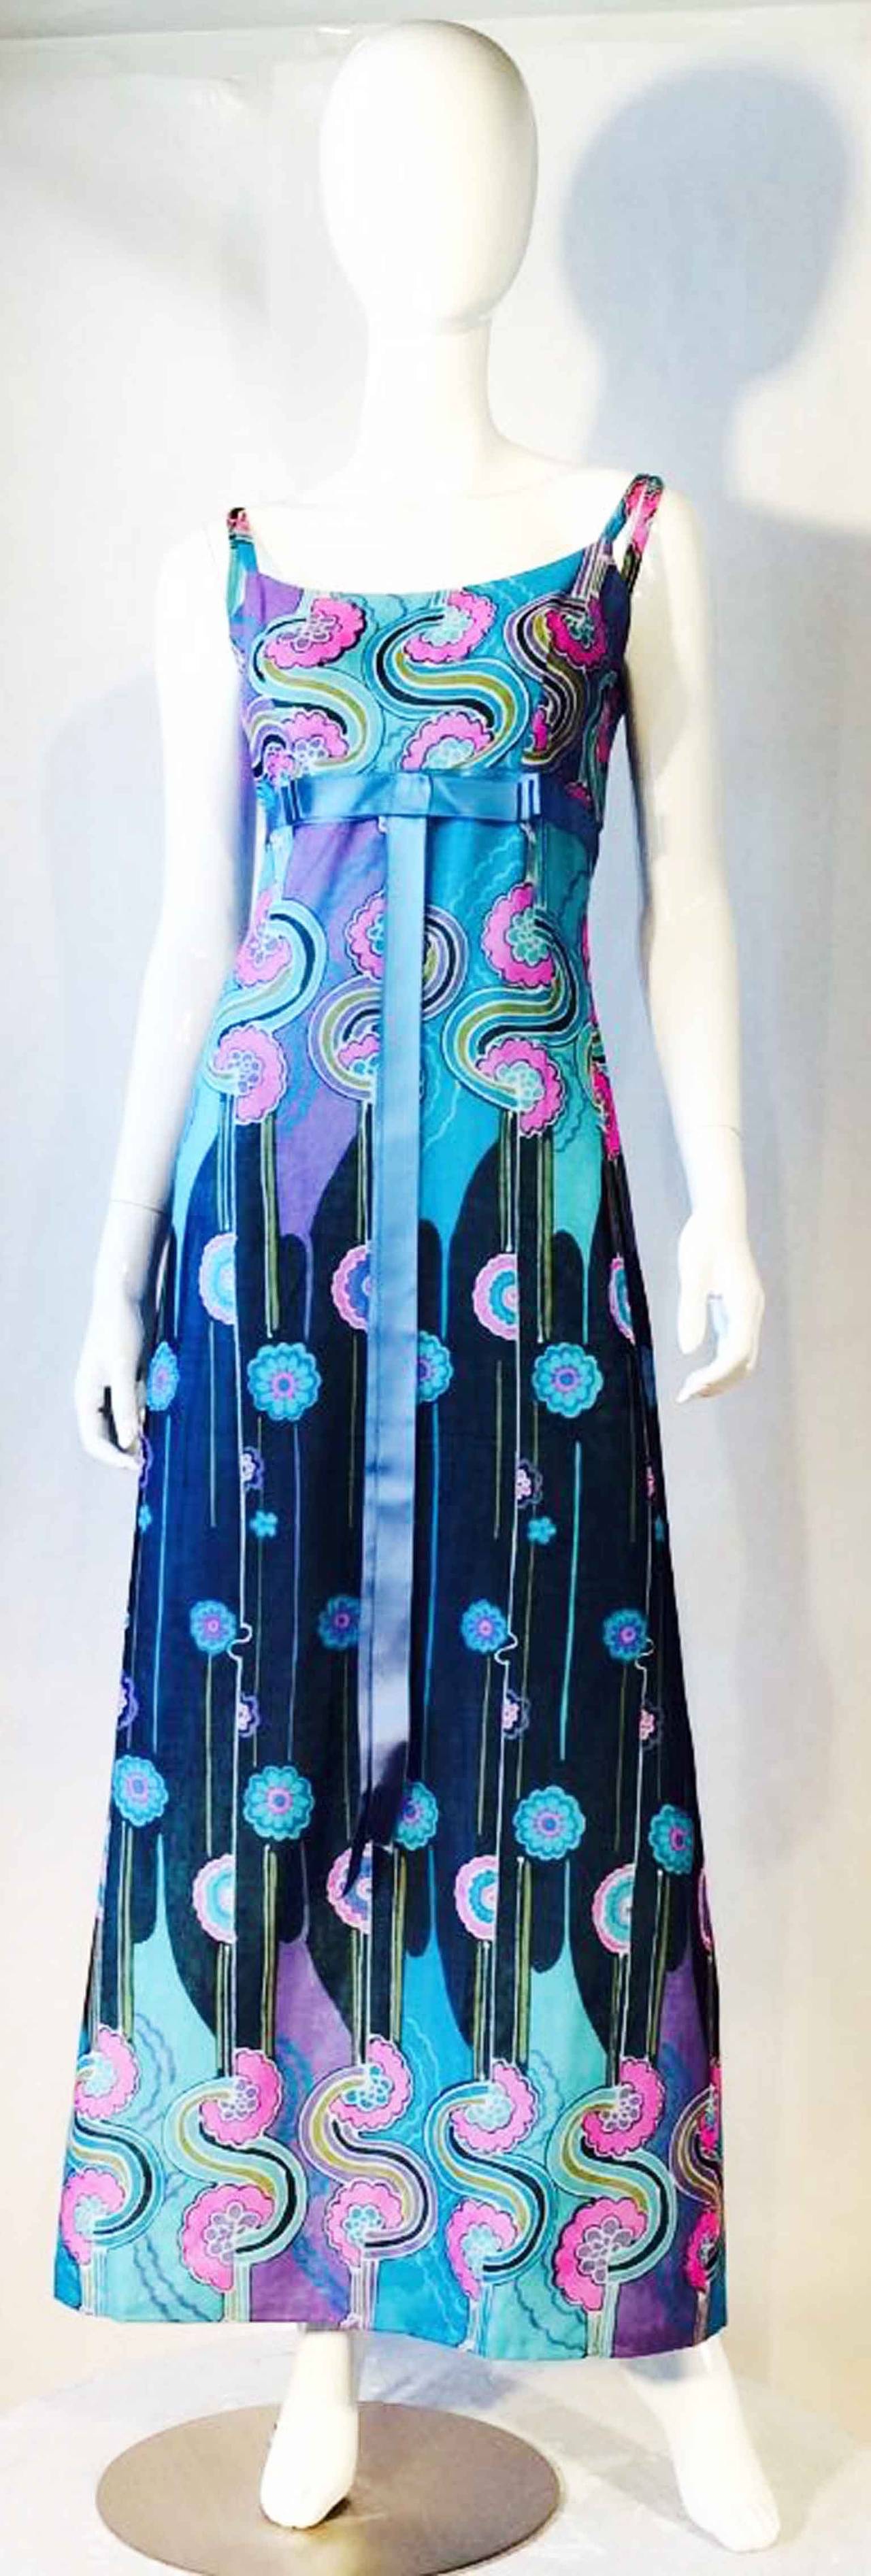 A fine and rare vintage Jean Hersey couture cocktail gown. Dynamically graphic cotton voile print item fully lined with a cinched empire waist and shoulder straps. Original attached waist bow and zipper back closure. A rarely seen Paris designer